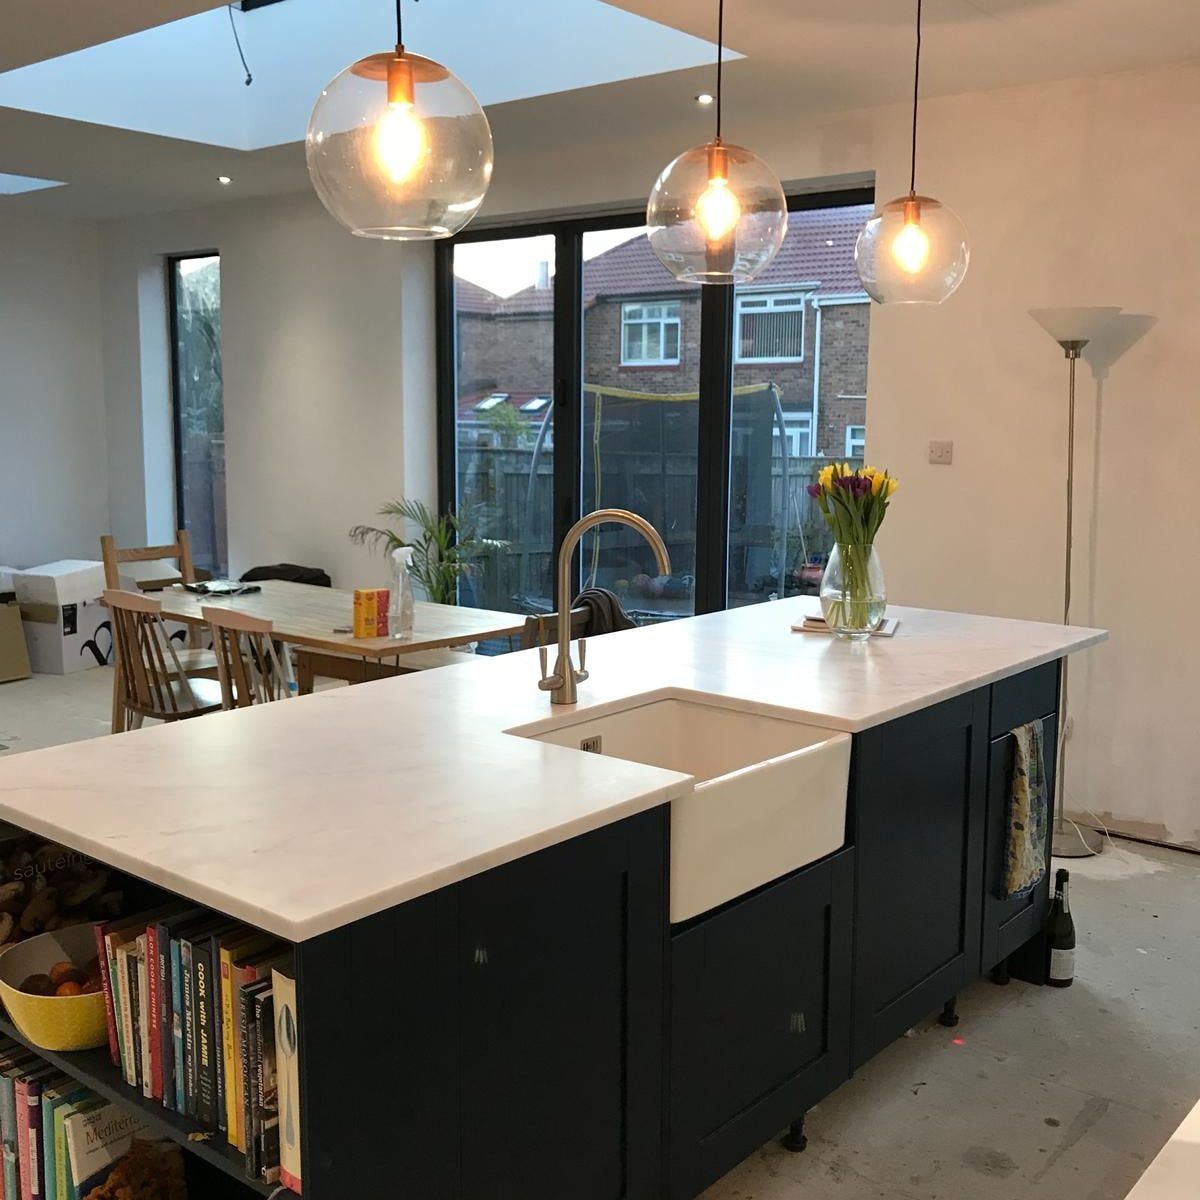 electrician kitchen project in newcastle upon tyne